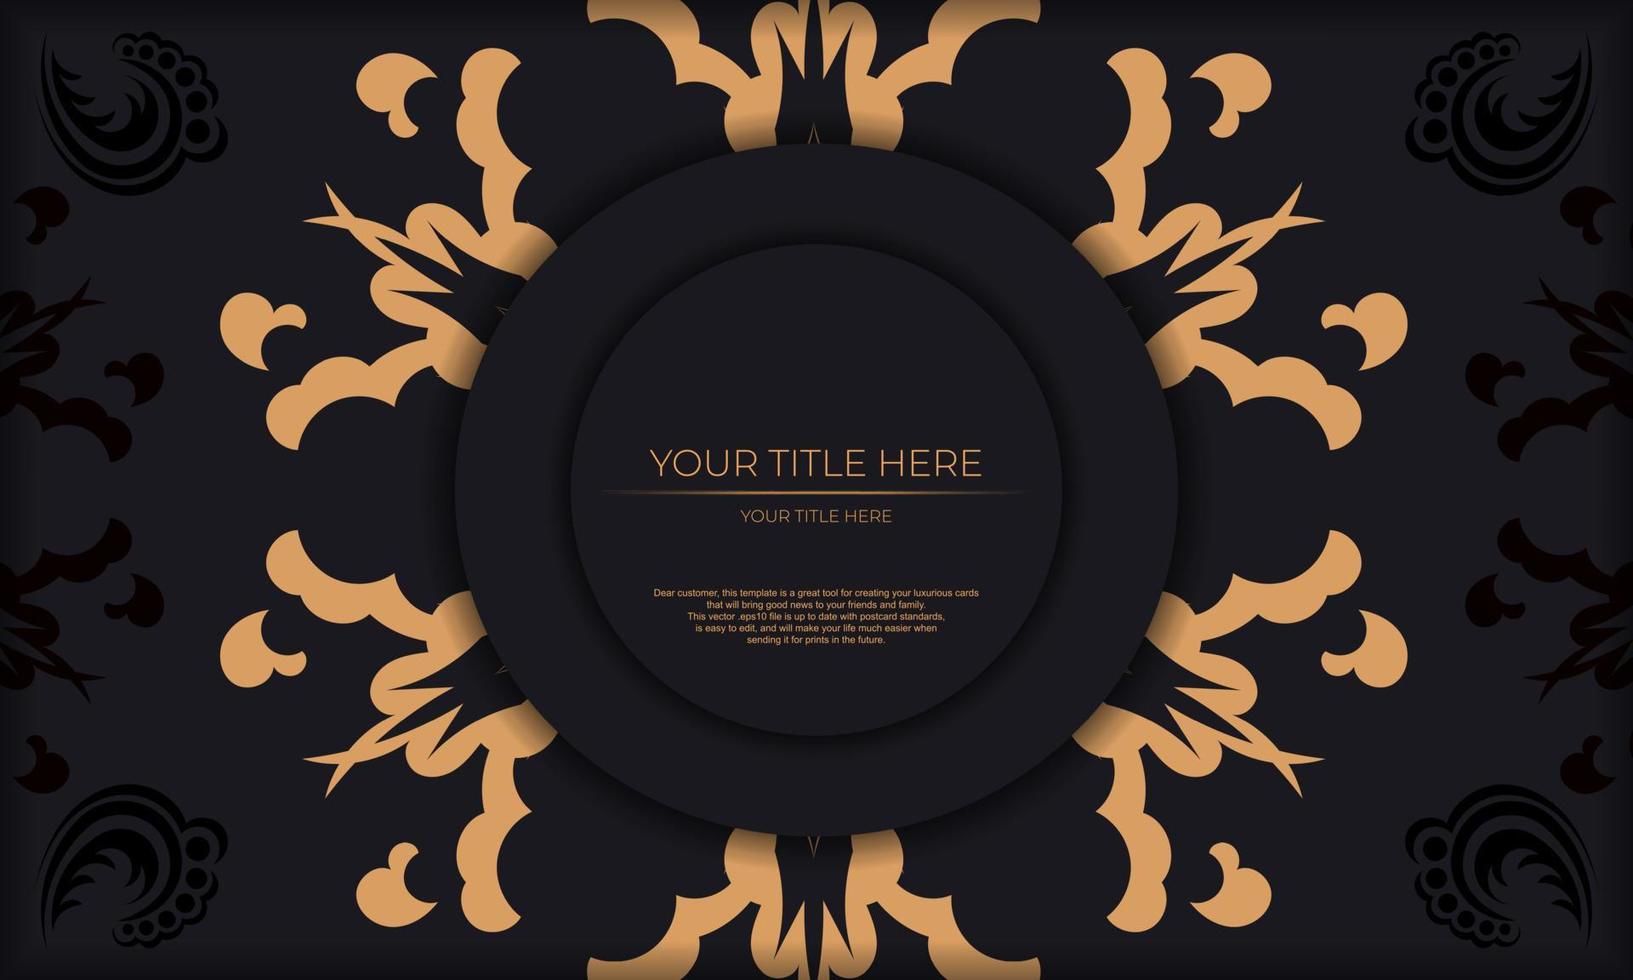 Black template banner with Indian ornaments and place for your design. Invitation card design with mandala patterns. vector